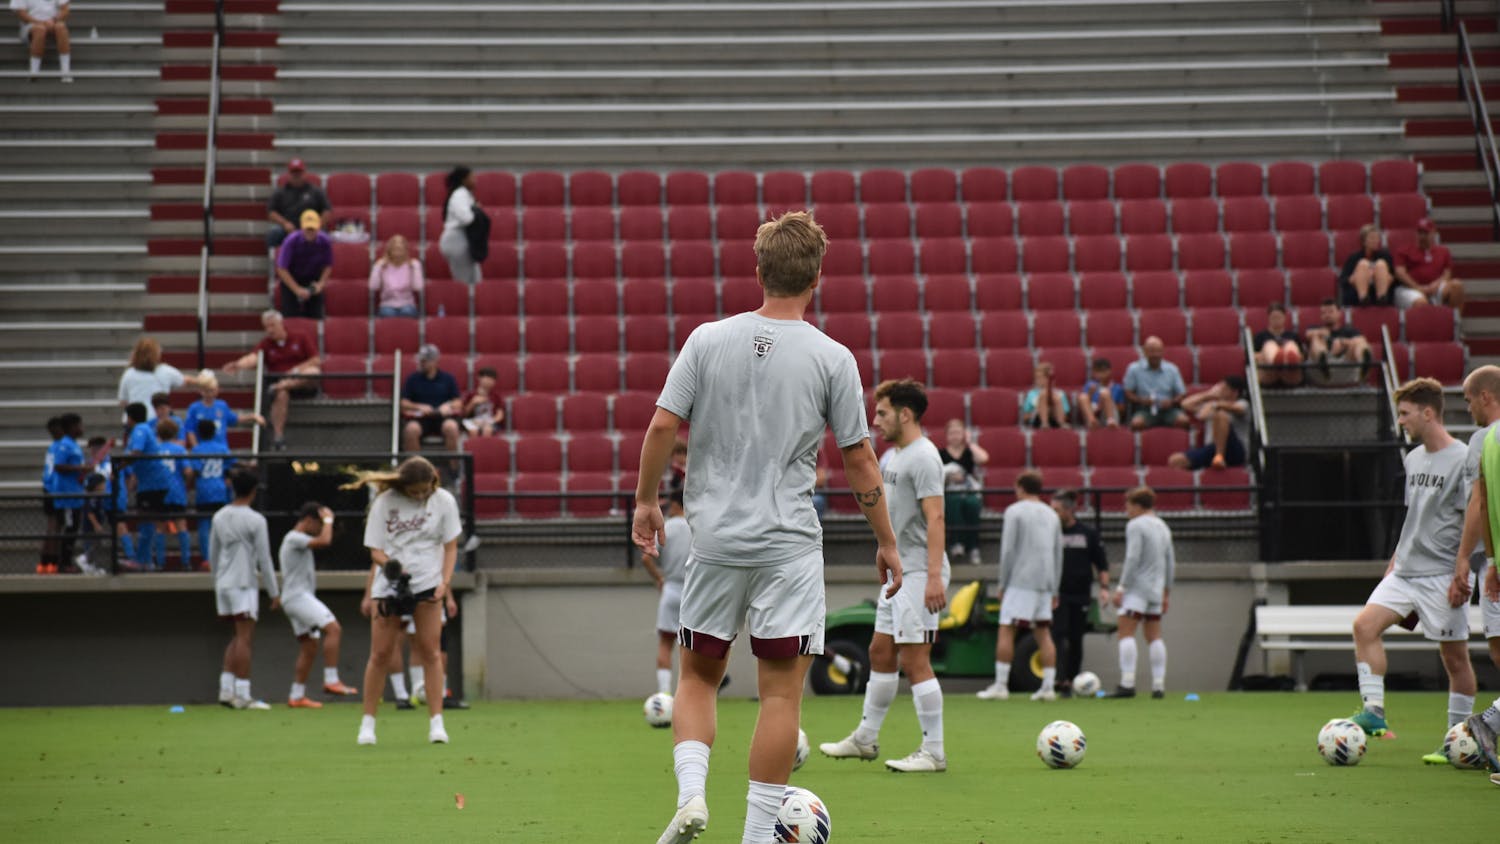 The University of South Carolina Men's soccer team warms up prior to their match against Georgia State at Stone Stadium on Sep. 23, 2023. The Gamecocks lost to the Panthers 1-0, making their season 2-4-1.&nbsp;